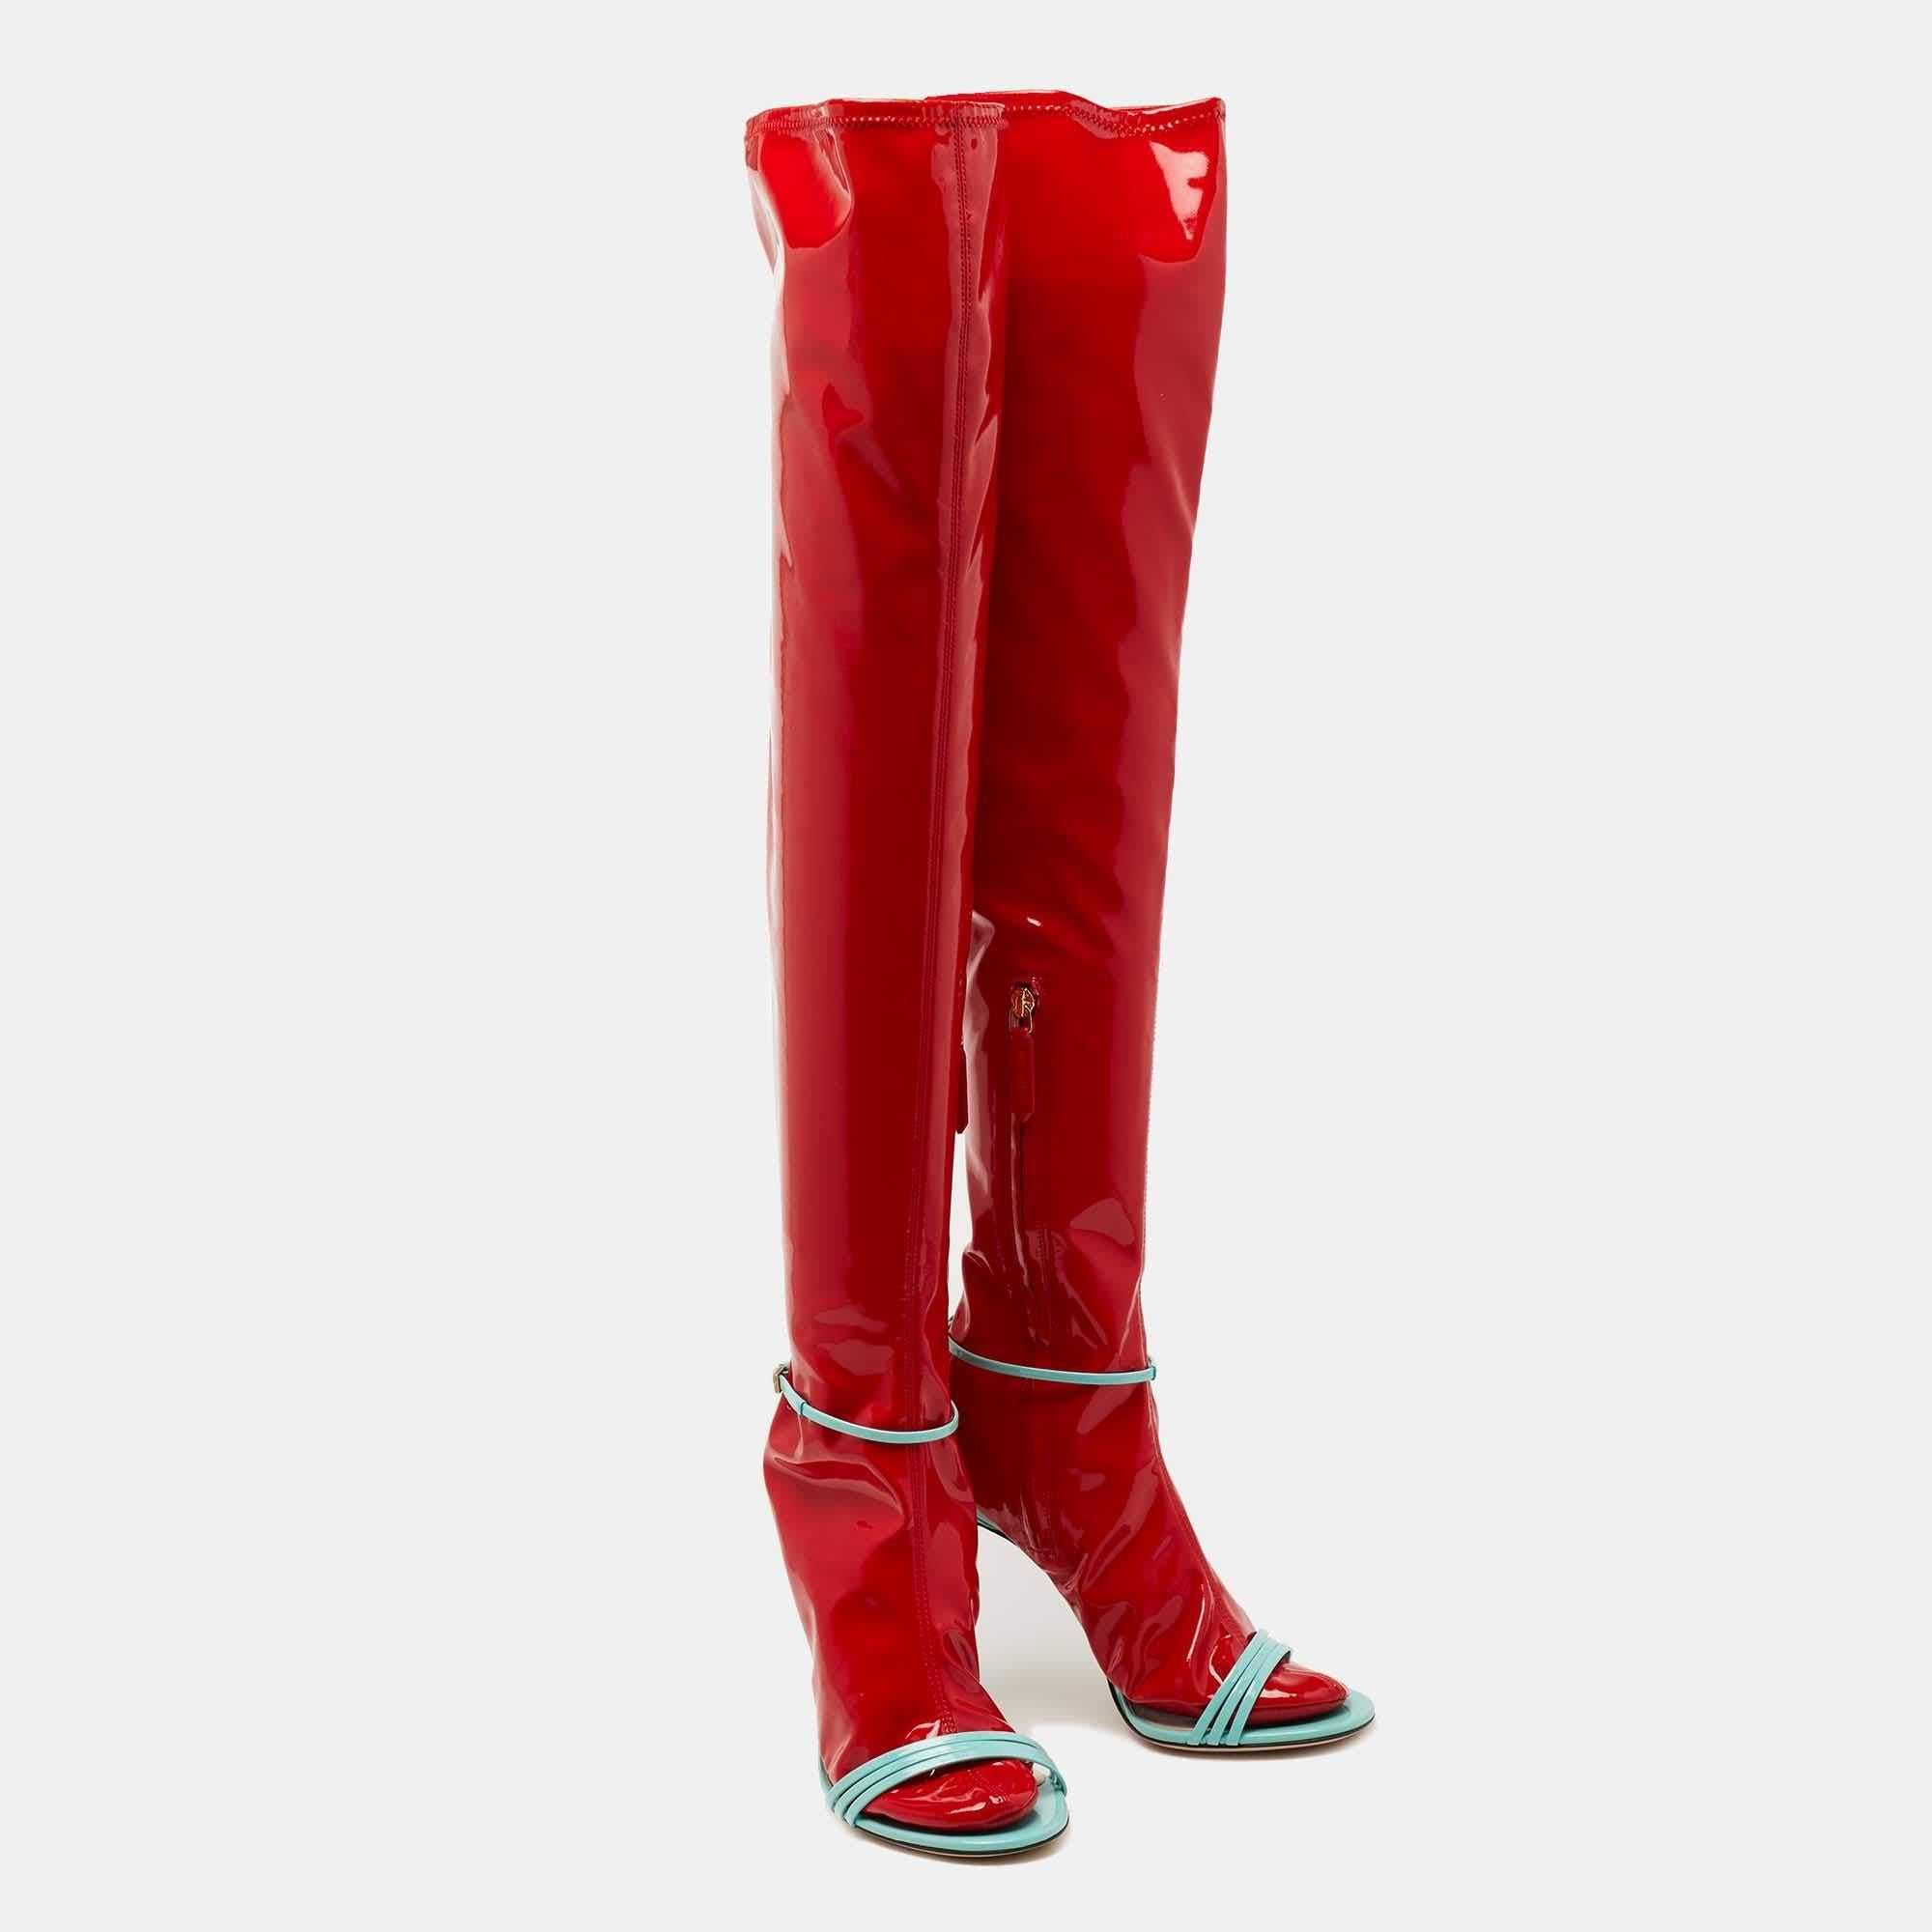 Gucci Red PVC and Patent Knee High Latex Socks Sandals Size 40 1